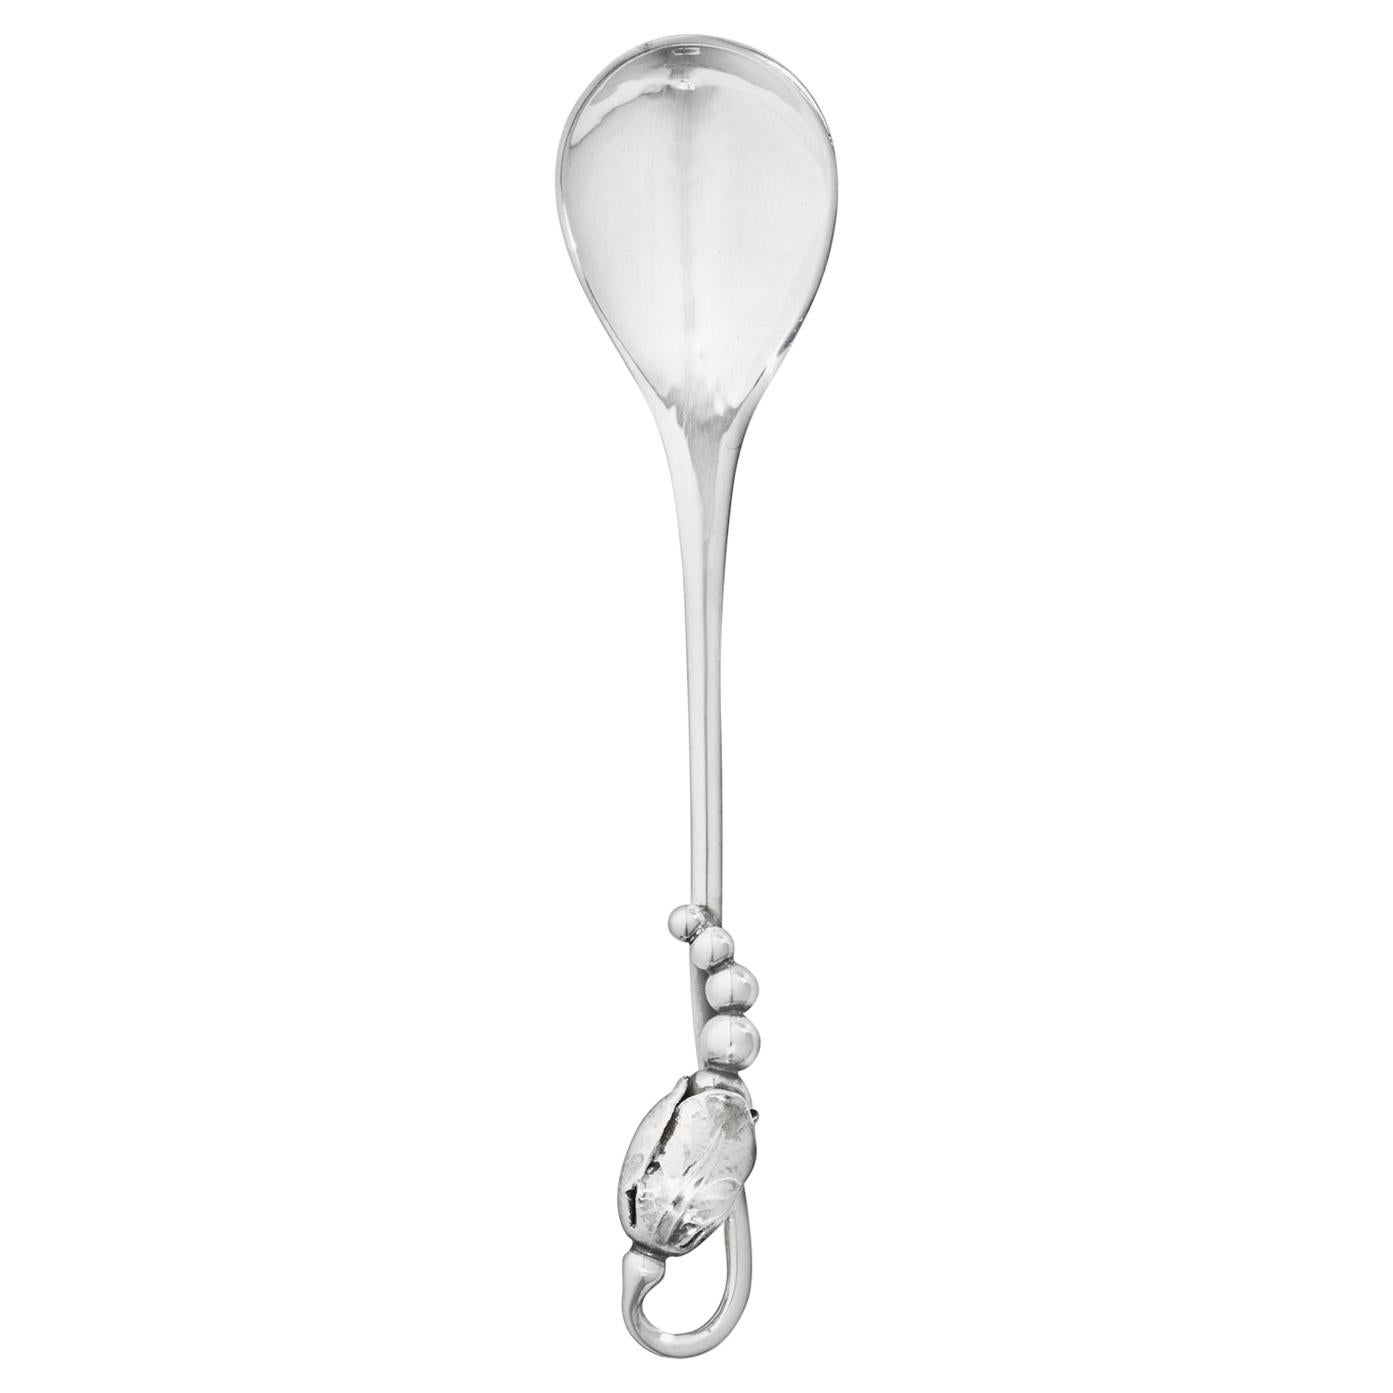 Georg Jensen Handcrafted Sterling Silver Blossom Mocha Spoon For Sale